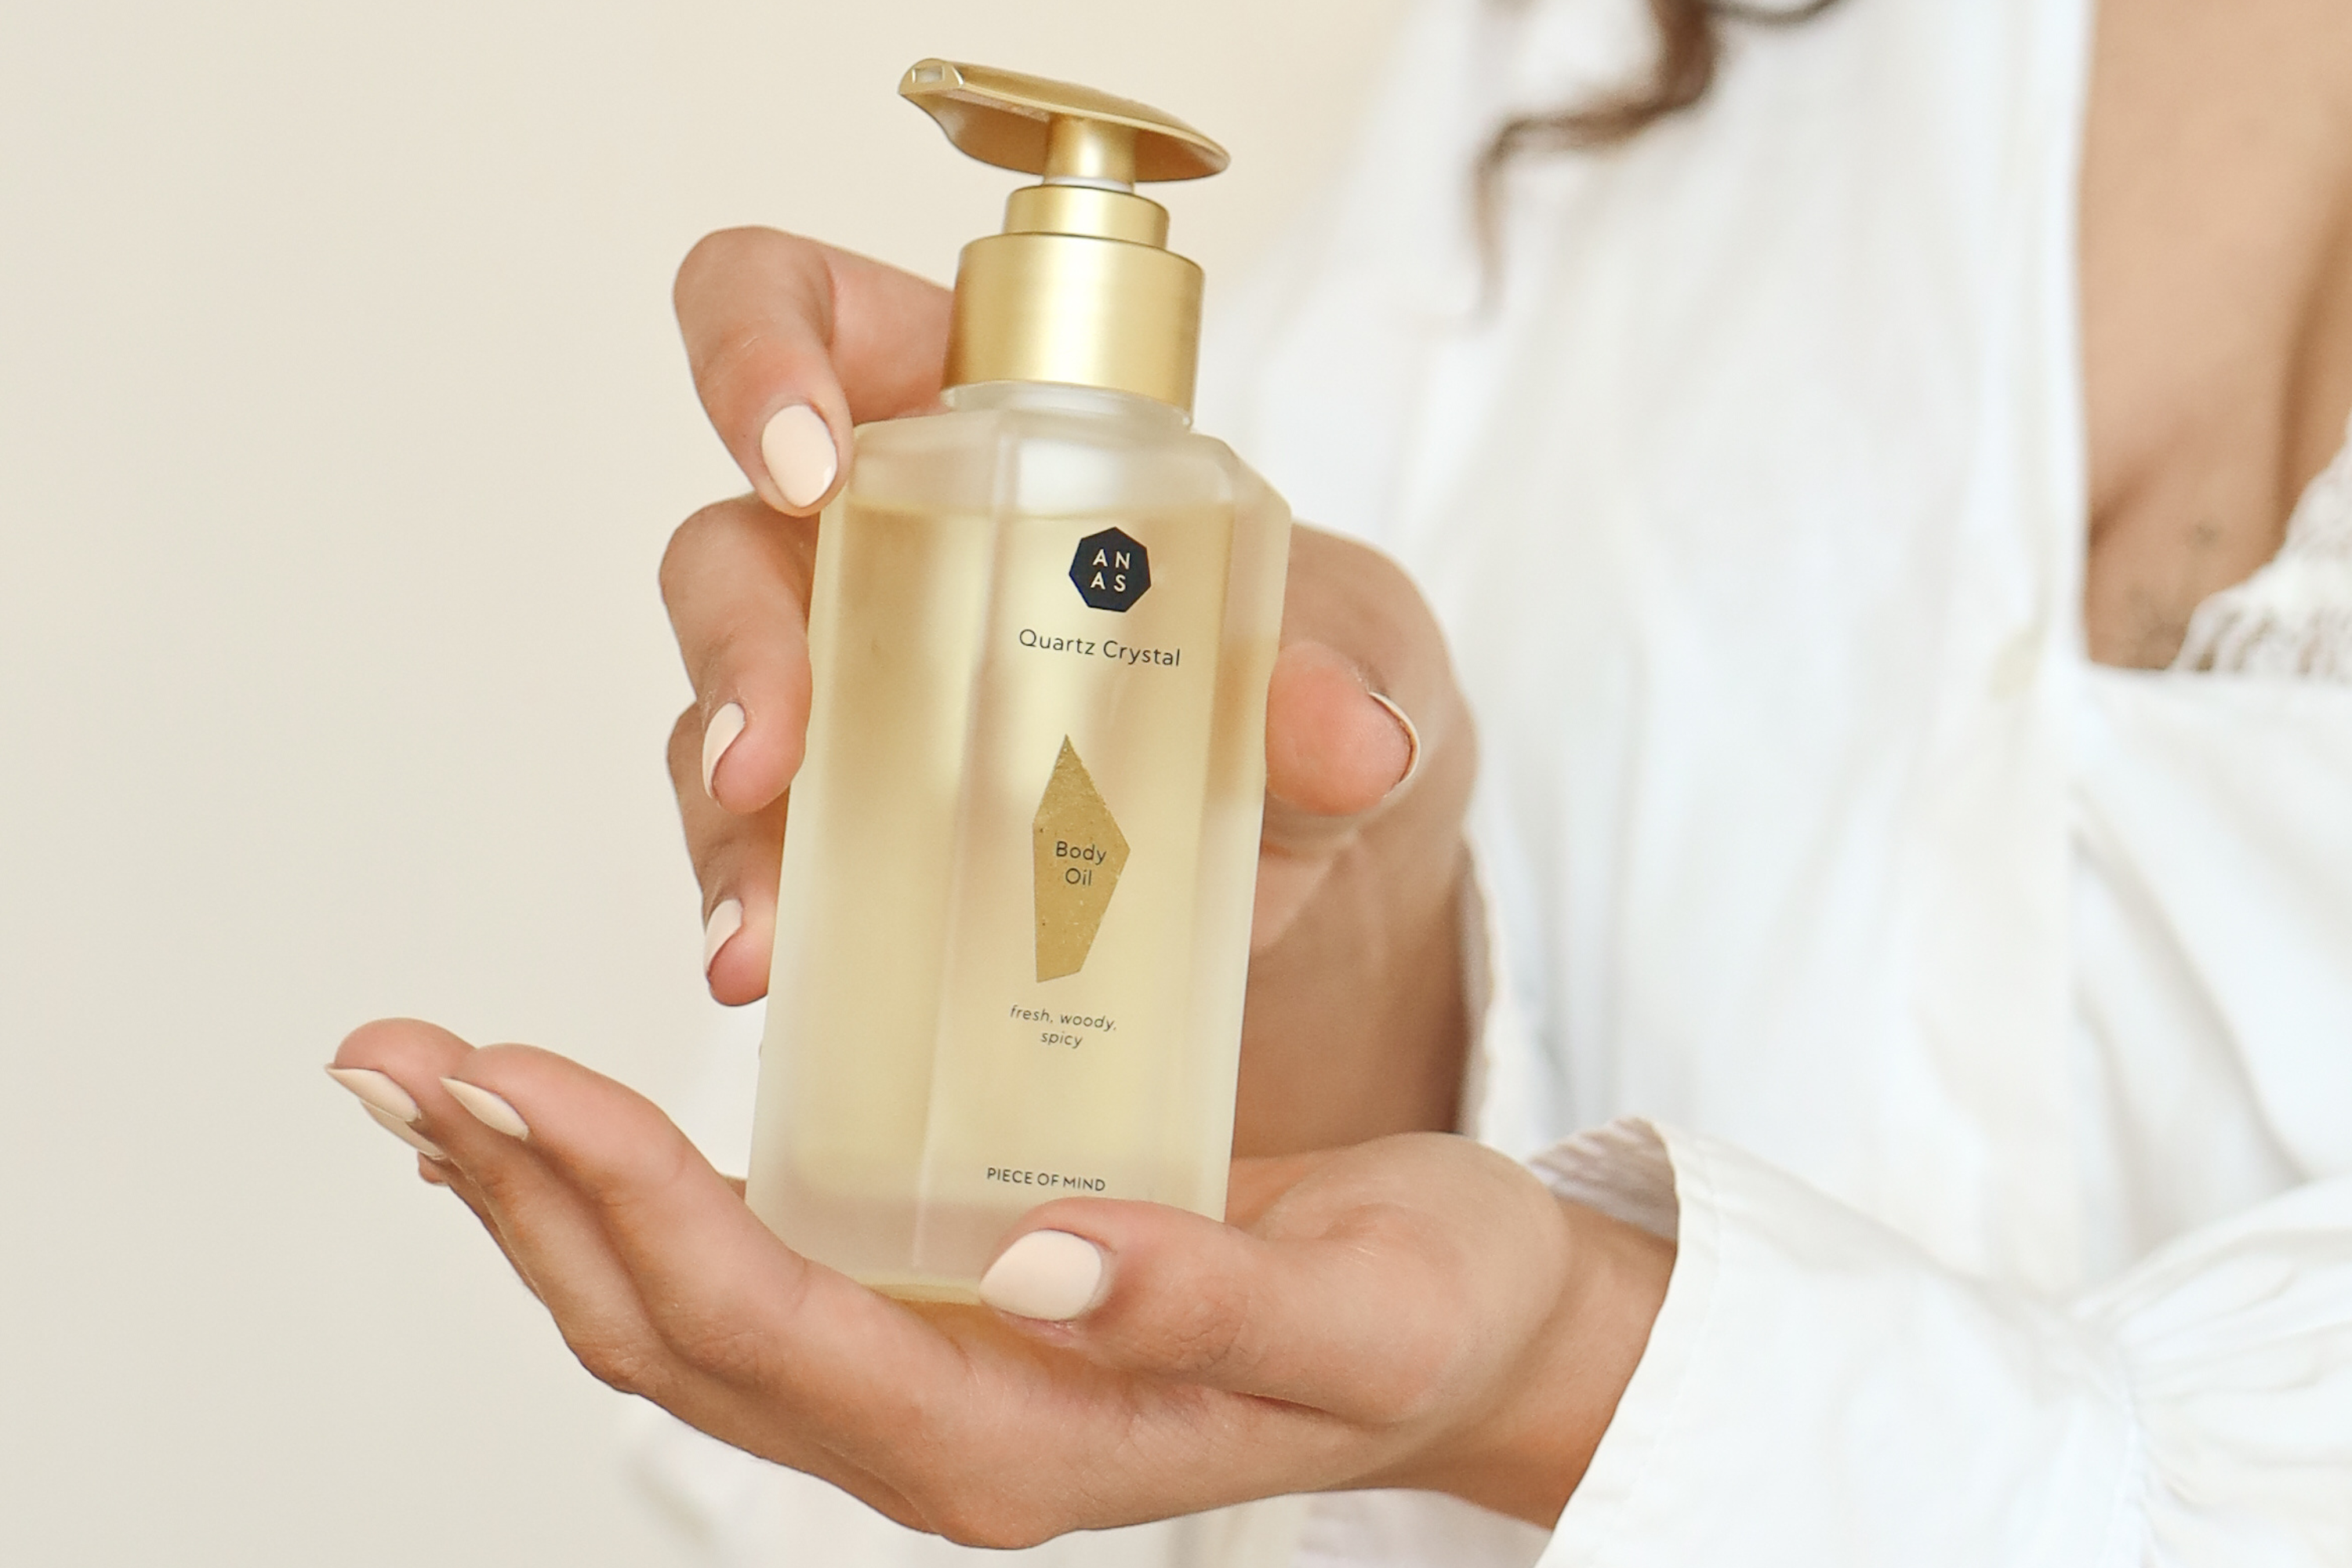 Introducing ANAS Body Oil:  Your New Favorite Way to Pamper Yourself